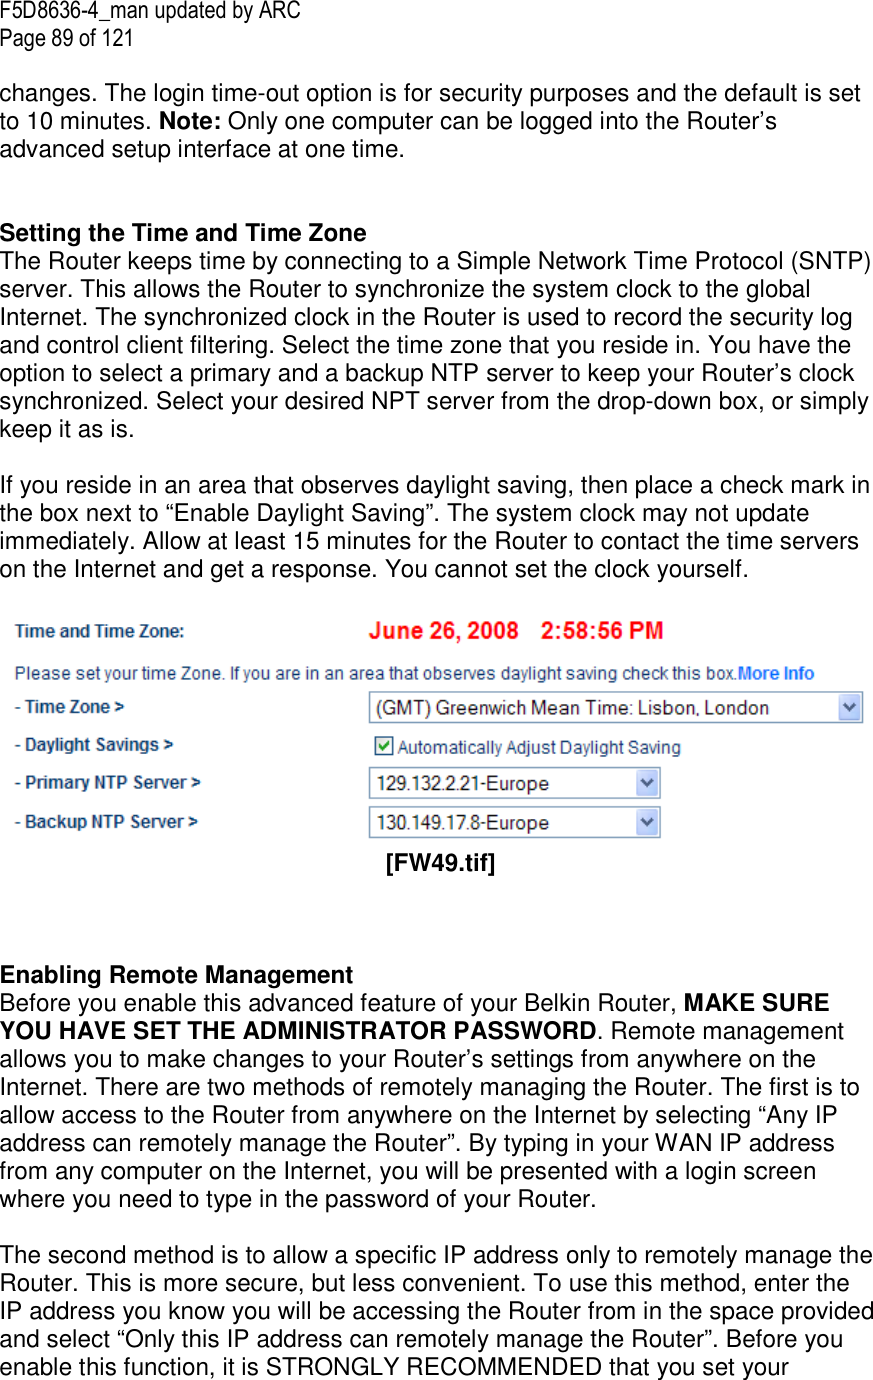 F5D8636-4_man updated by ARC Page 89 of 121  changes. The login time-out option is for security purposes and the default is set to 10 minutes. Note: Only one computer can be logged into the Router’s advanced setup interface at one time.    Setting the Time and Time Zone  The Router keeps time by connecting to a Simple Network Time Protocol (SNTP) server. This allows the Router to synchronize the system clock to the global Internet. The synchronized clock in the Router is used to record the security log and control client filtering. Select the time zone that you reside in. You have the option to select a primary and a backup NTP server to keep your Router’s clock synchronized. Select your desired NPT server from the drop-down box, or simply keep it as is.   If you reside in an area that observes daylight saving, then place a check mark in the box next to “Enable Daylight Saving”. The system clock may not update immediately. Allow at least 15 minutes for the Router to contact the time servers on the Internet and get a response. You cannot set the clock yourself.     [FW49.tif]    Enabling Remote Management  Before you enable this advanced feature of your Belkin Router, MAKE SURE YOU HAVE SET THE ADMINISTRATOR PASSWORD. Remote management allows you to make changes to your Router’s settings from anywhere on the Internet. There are two methods of remotely managing the Router. The first is to allow access to the Router from anywhere on the Internet by selecting “Any IP address can remotely manage the Router”. By typing in your WAN IP address from any computer on the Internet, you will be presented with a login screen where you need to type in the password of your Router.   The second method is to allow a specific IP address only to remotely manage the Router. This is more secure, but less convenient. To use this method, enter the IP address you know you will be accessing the Router from in the space provided and select “Only this IP address can remotely manage the Router”. Before you enable this function, it is STRONGLY RECOMMENDED that you set your 